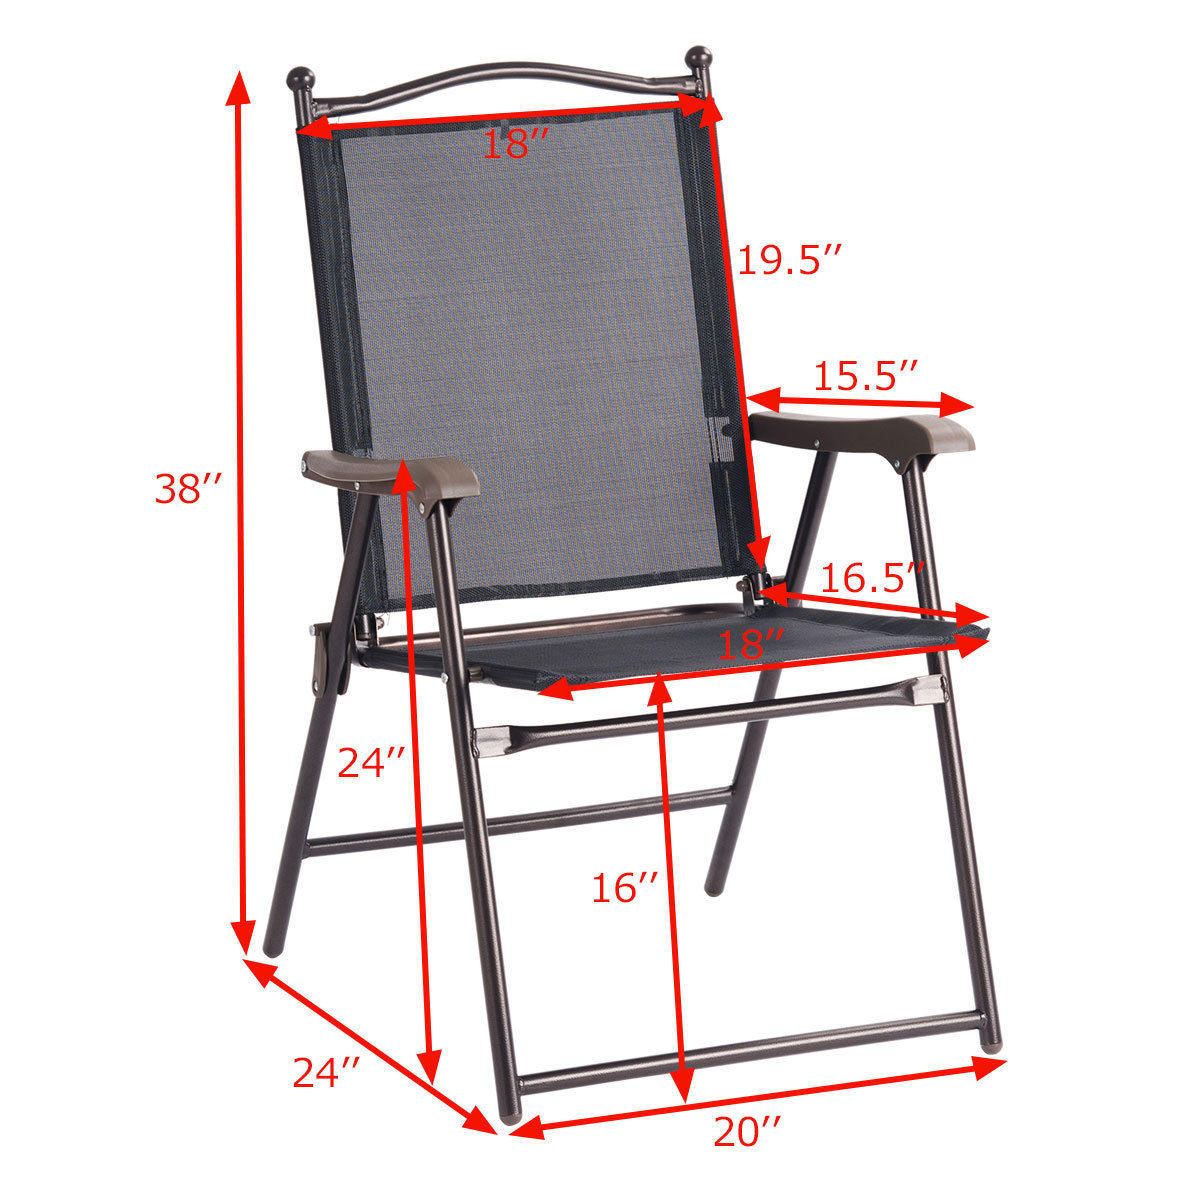 Costway Set of 2 Patio Folding Sling Back Chairs Camping Deck Garden Beach Black - image 2 of 8